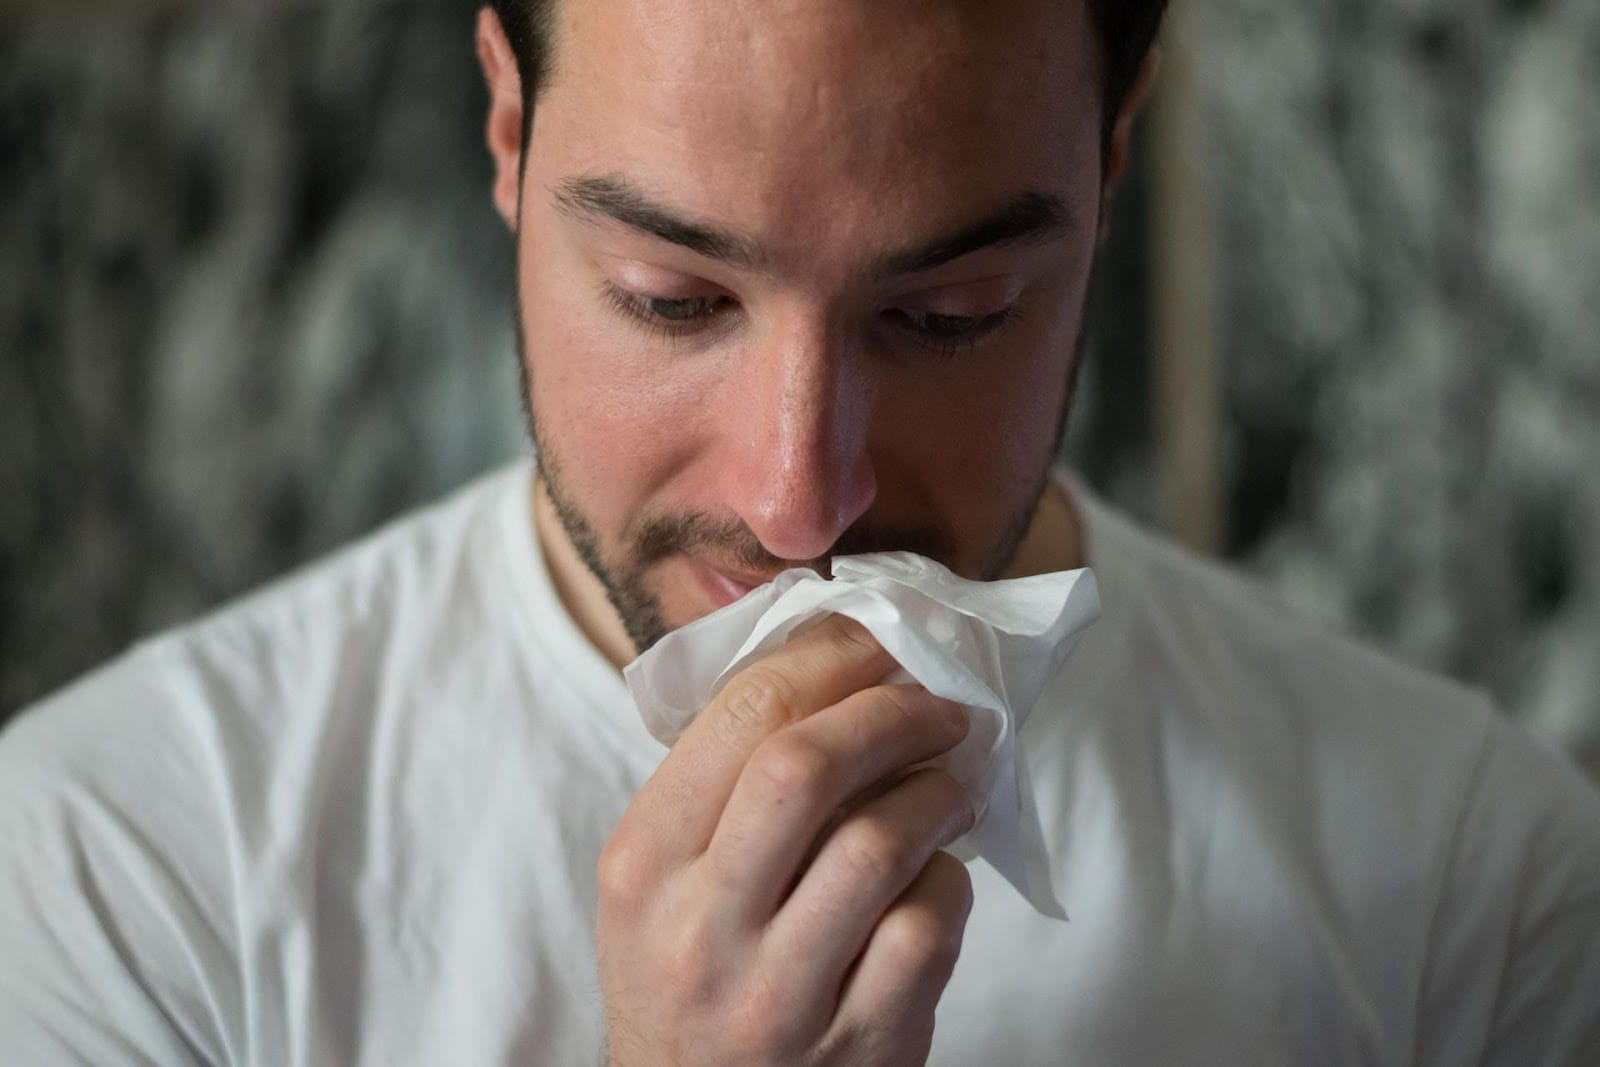 A Man Holding A Tissue To His Nose Looking Down